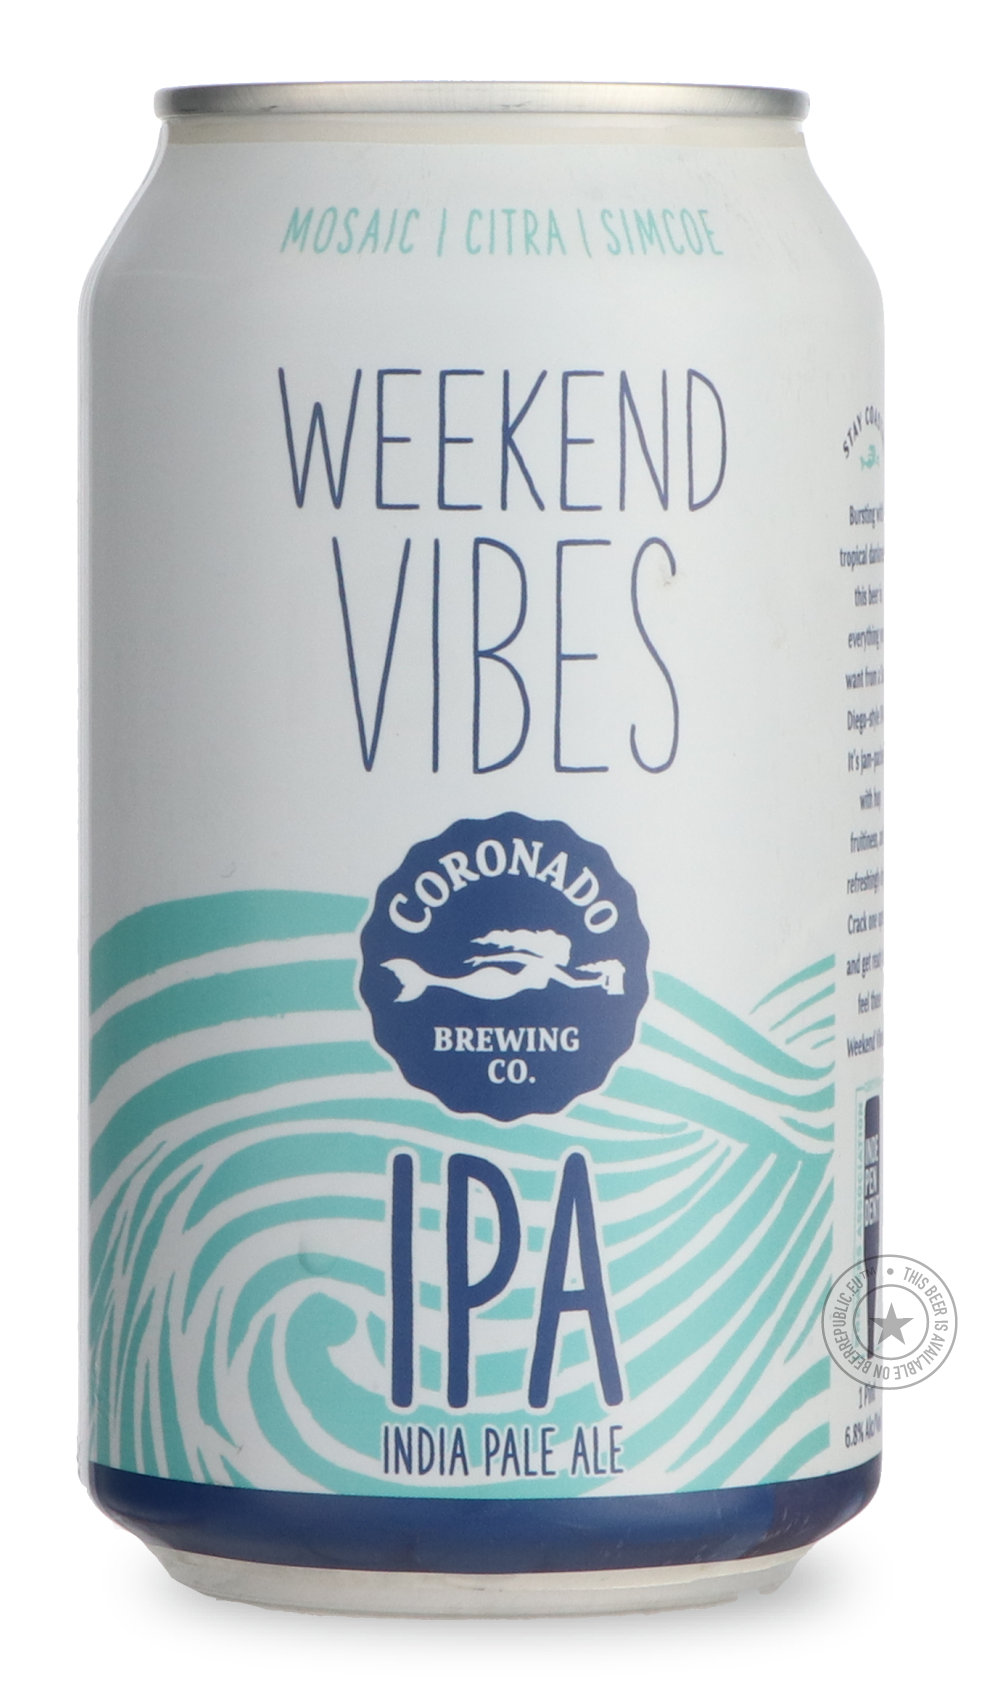 -Coronado- Weekend Vibes-IPA- Only @ Beer Republic - The best online beer store for American & Canadian craft beer - Buy beer online from the USA and Canada - Bier online kopen - Amerikaans bier kopen - Craft beer store - Craft beer kopen - Amerikanisch bier kaufen - Bier online kaufen - Acheter biere online - IPA - Stout - Porter - New England IPA - Hazy IPA - Imperial Stout - Barrel Aged - Barrel Aged Imperial Stout - Brown - Dark beer - Blond - Blonde - Pilsner - Lager - Wheat - Weizen - Amber - Barley W